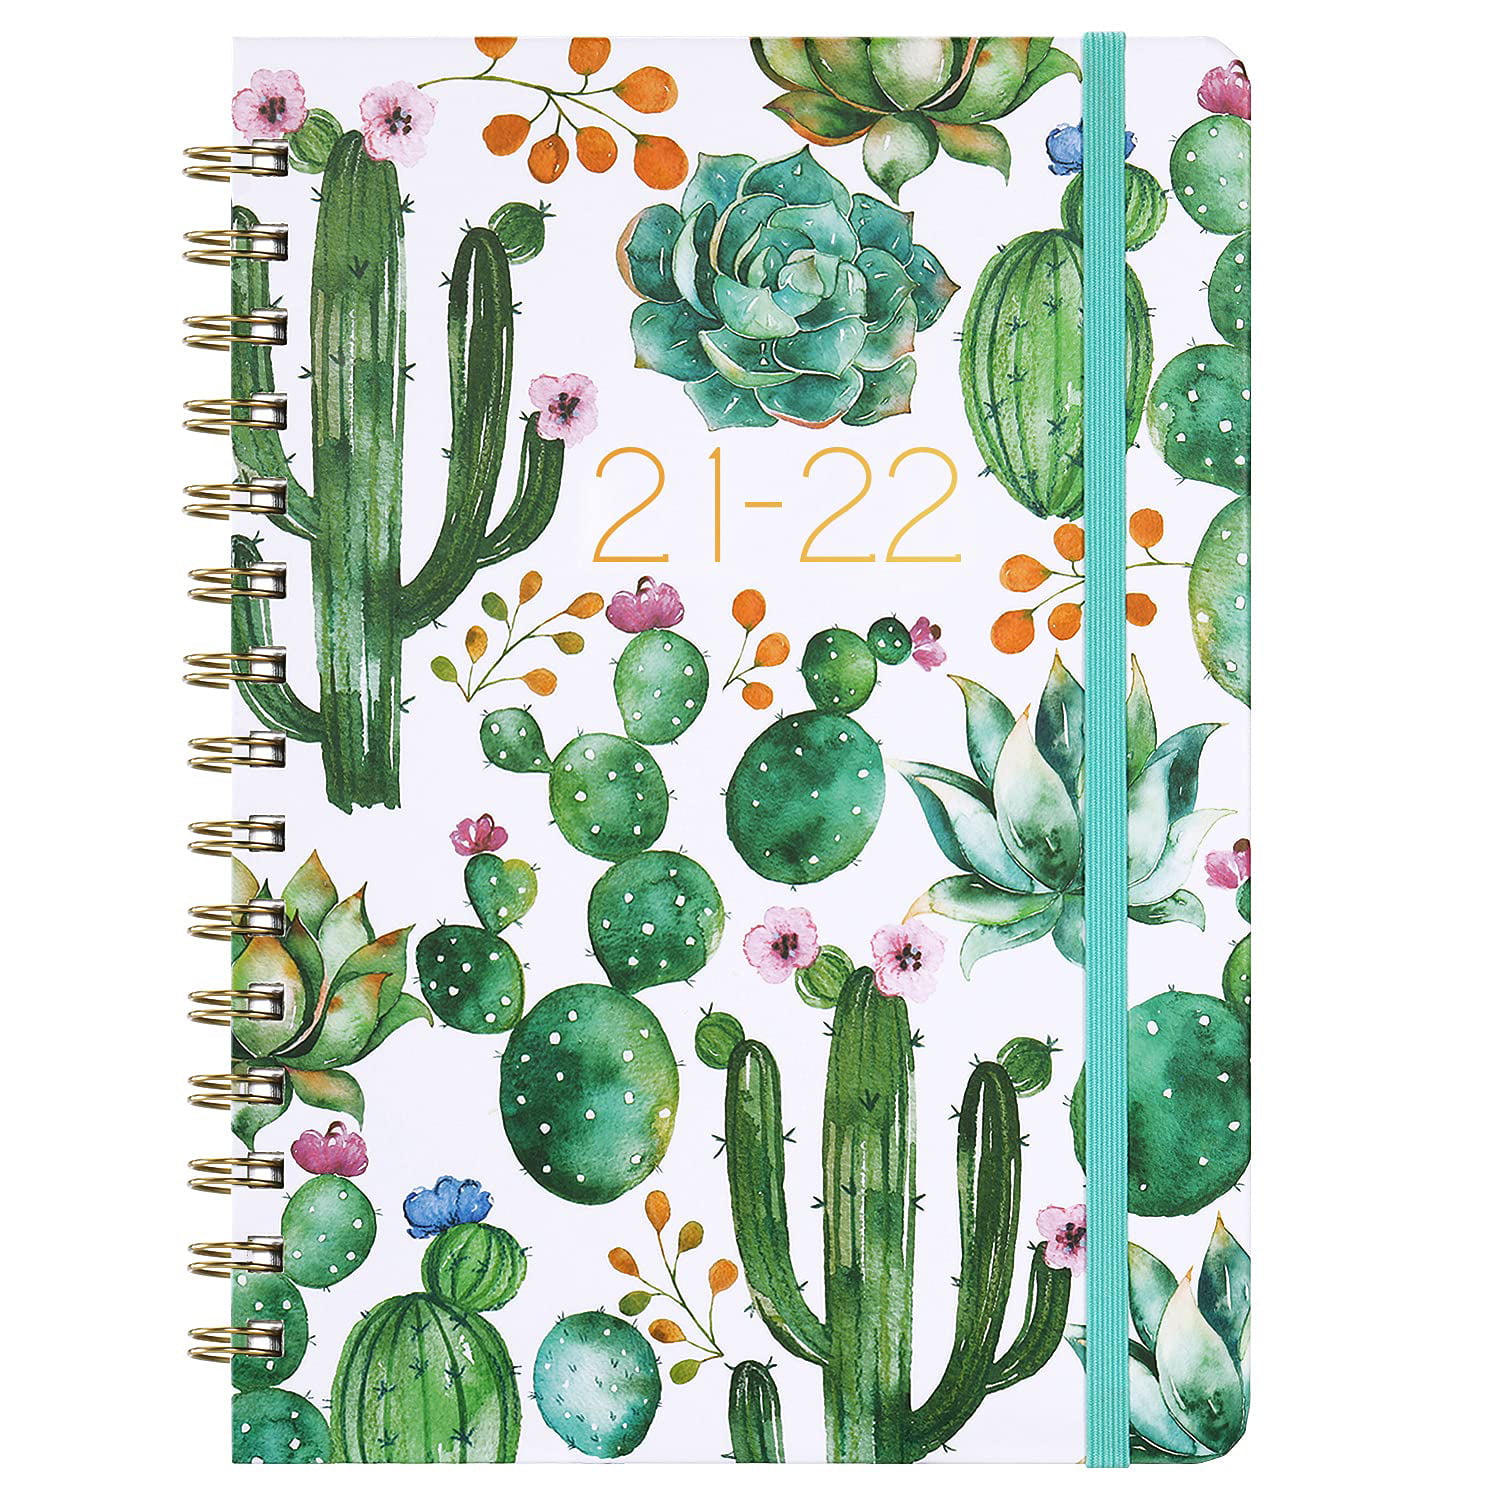 2021 Weekly Monthly Planner Twin Wire Binding Thick Paper Watercolor Tree Large